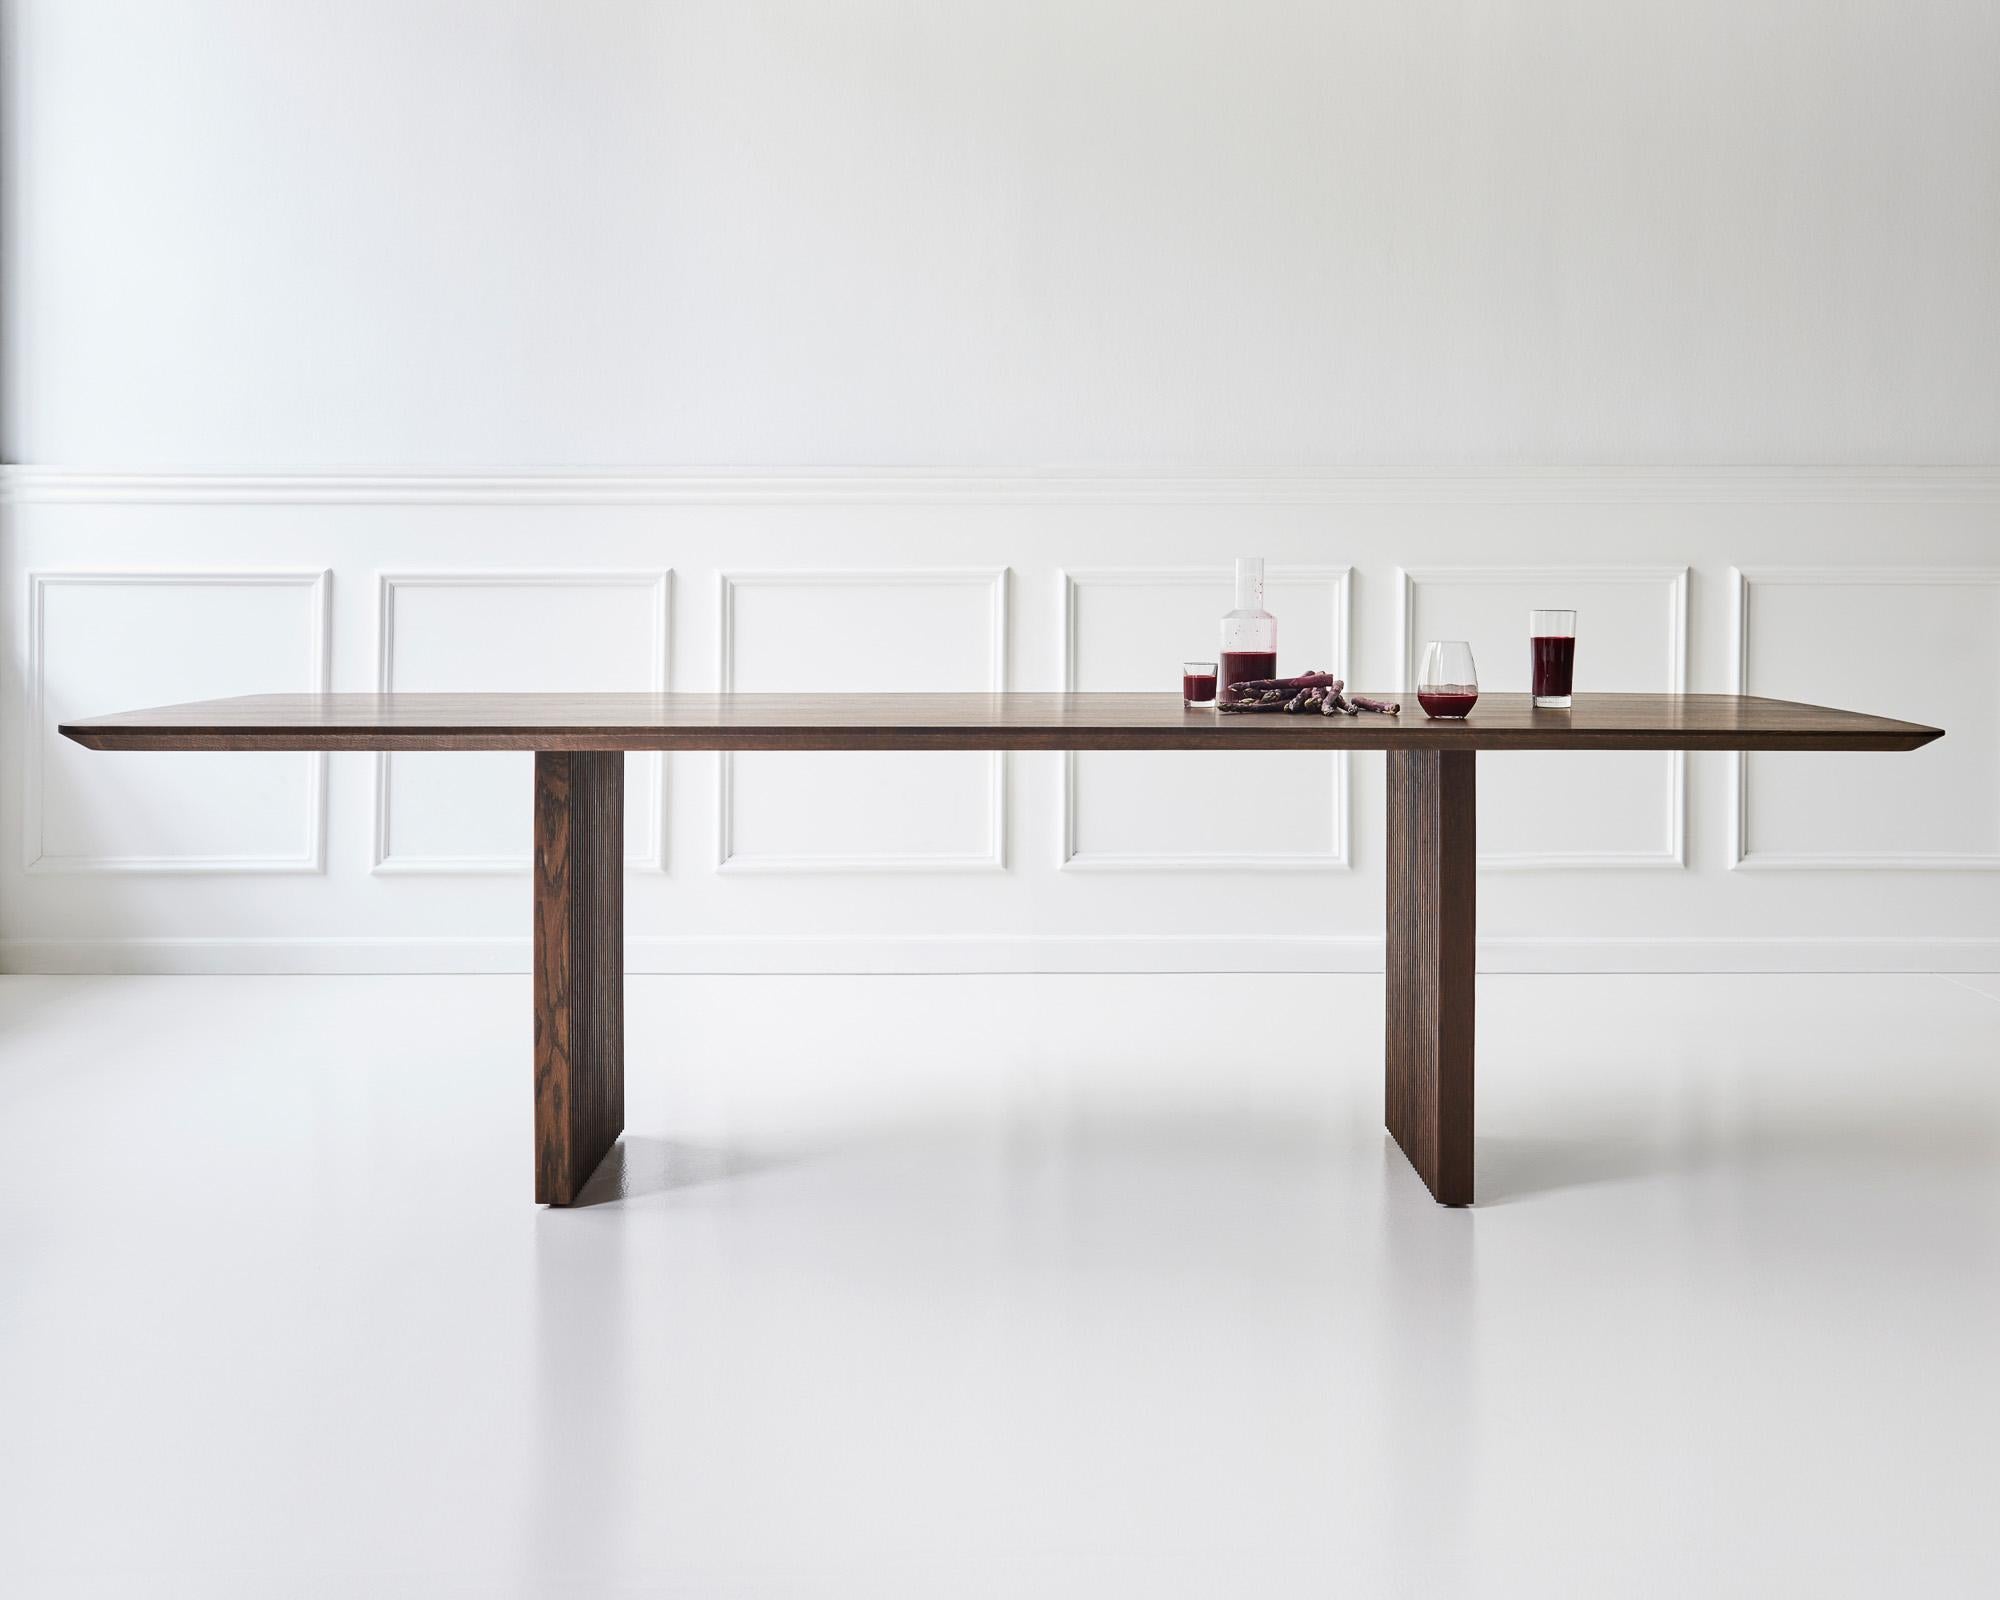 TEN dining table, rectangular, 400cm
Solid wood tabletop and legs

Height: 72 or 74 cm

Tabletop dimensions:
– 200 x 95 cm
– 240 x 105 cm
– 270 x 105 cm
– 300 x 105 cm
– 340 x 105 cm
– 370 x 105 cm
– 400 x 105 cm

Tabletop’s thickness: